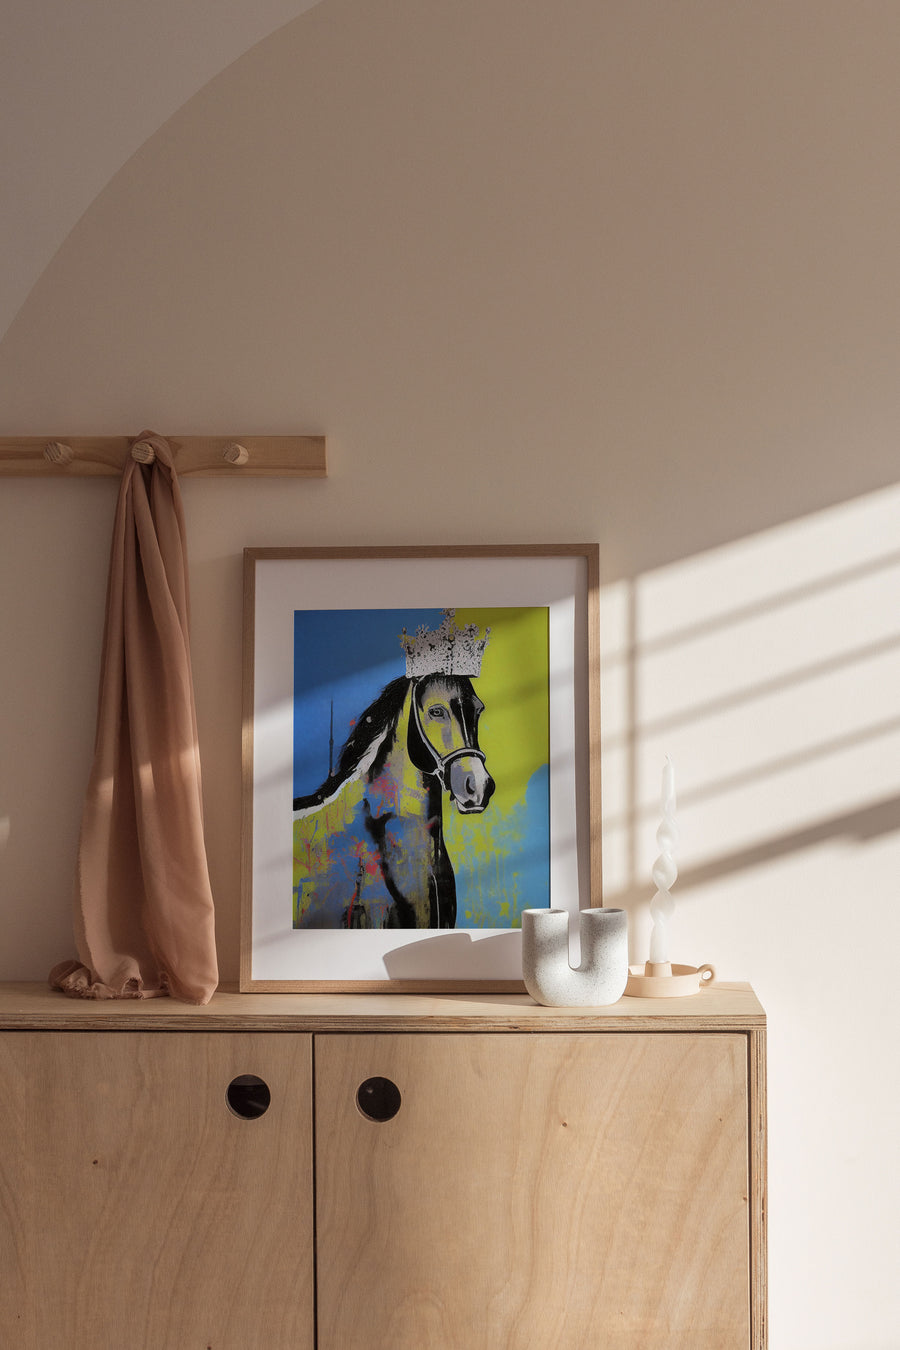 How horse wall art can help uplift the energy and bring positive vibes to your space